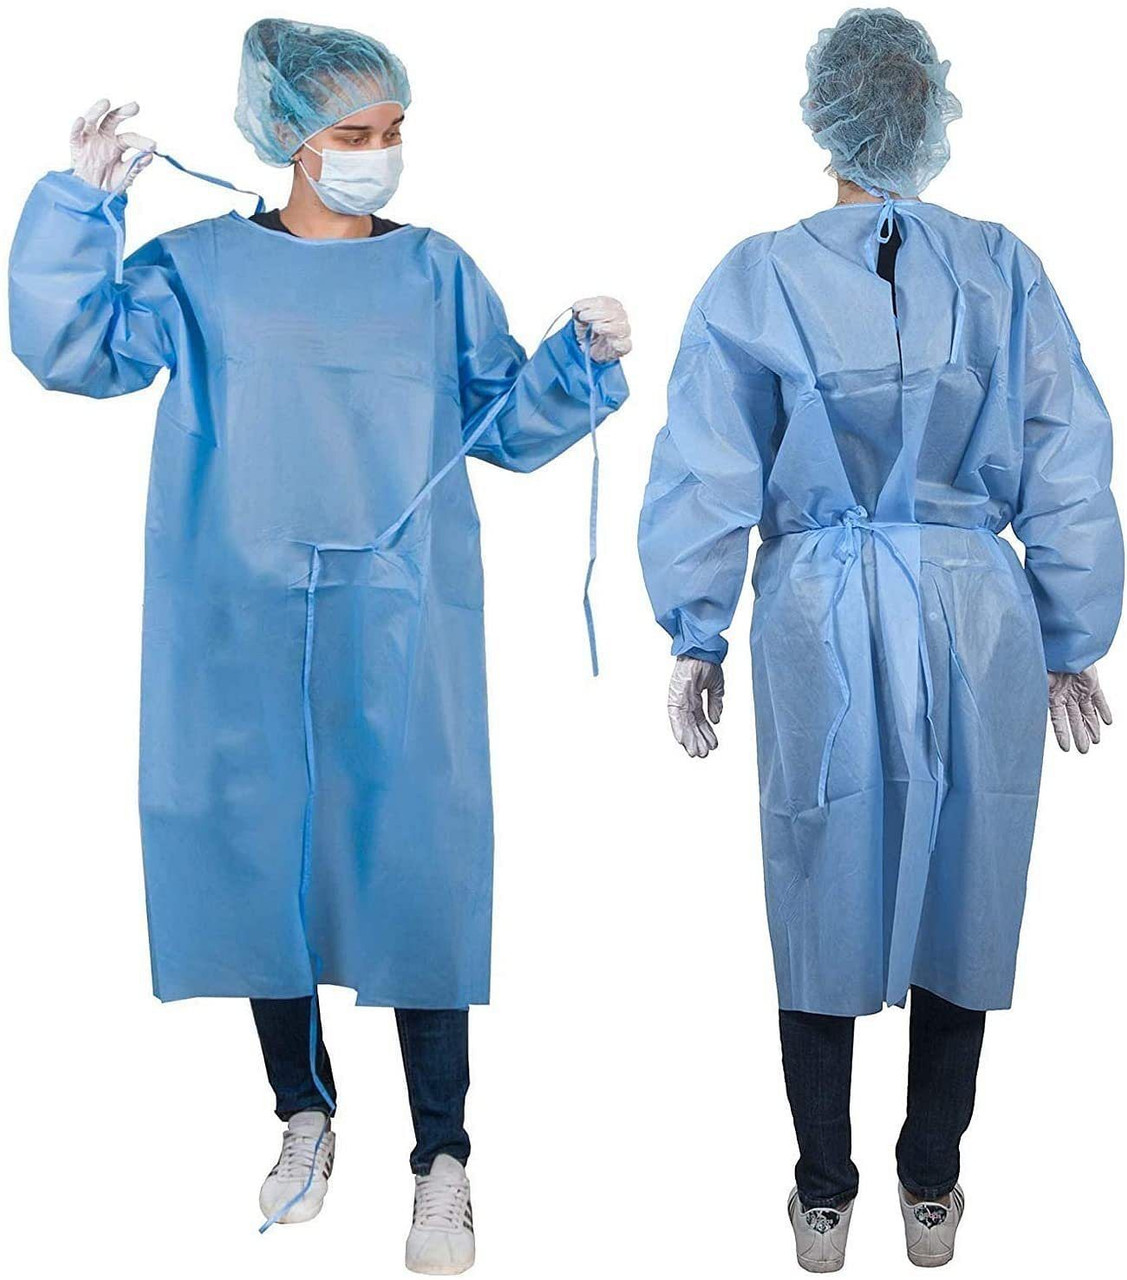 Polyethylene Robes Blue. Pack of 10 Adult Disposable Robes X-Large. Fluid-Resistant PE Frocks with 